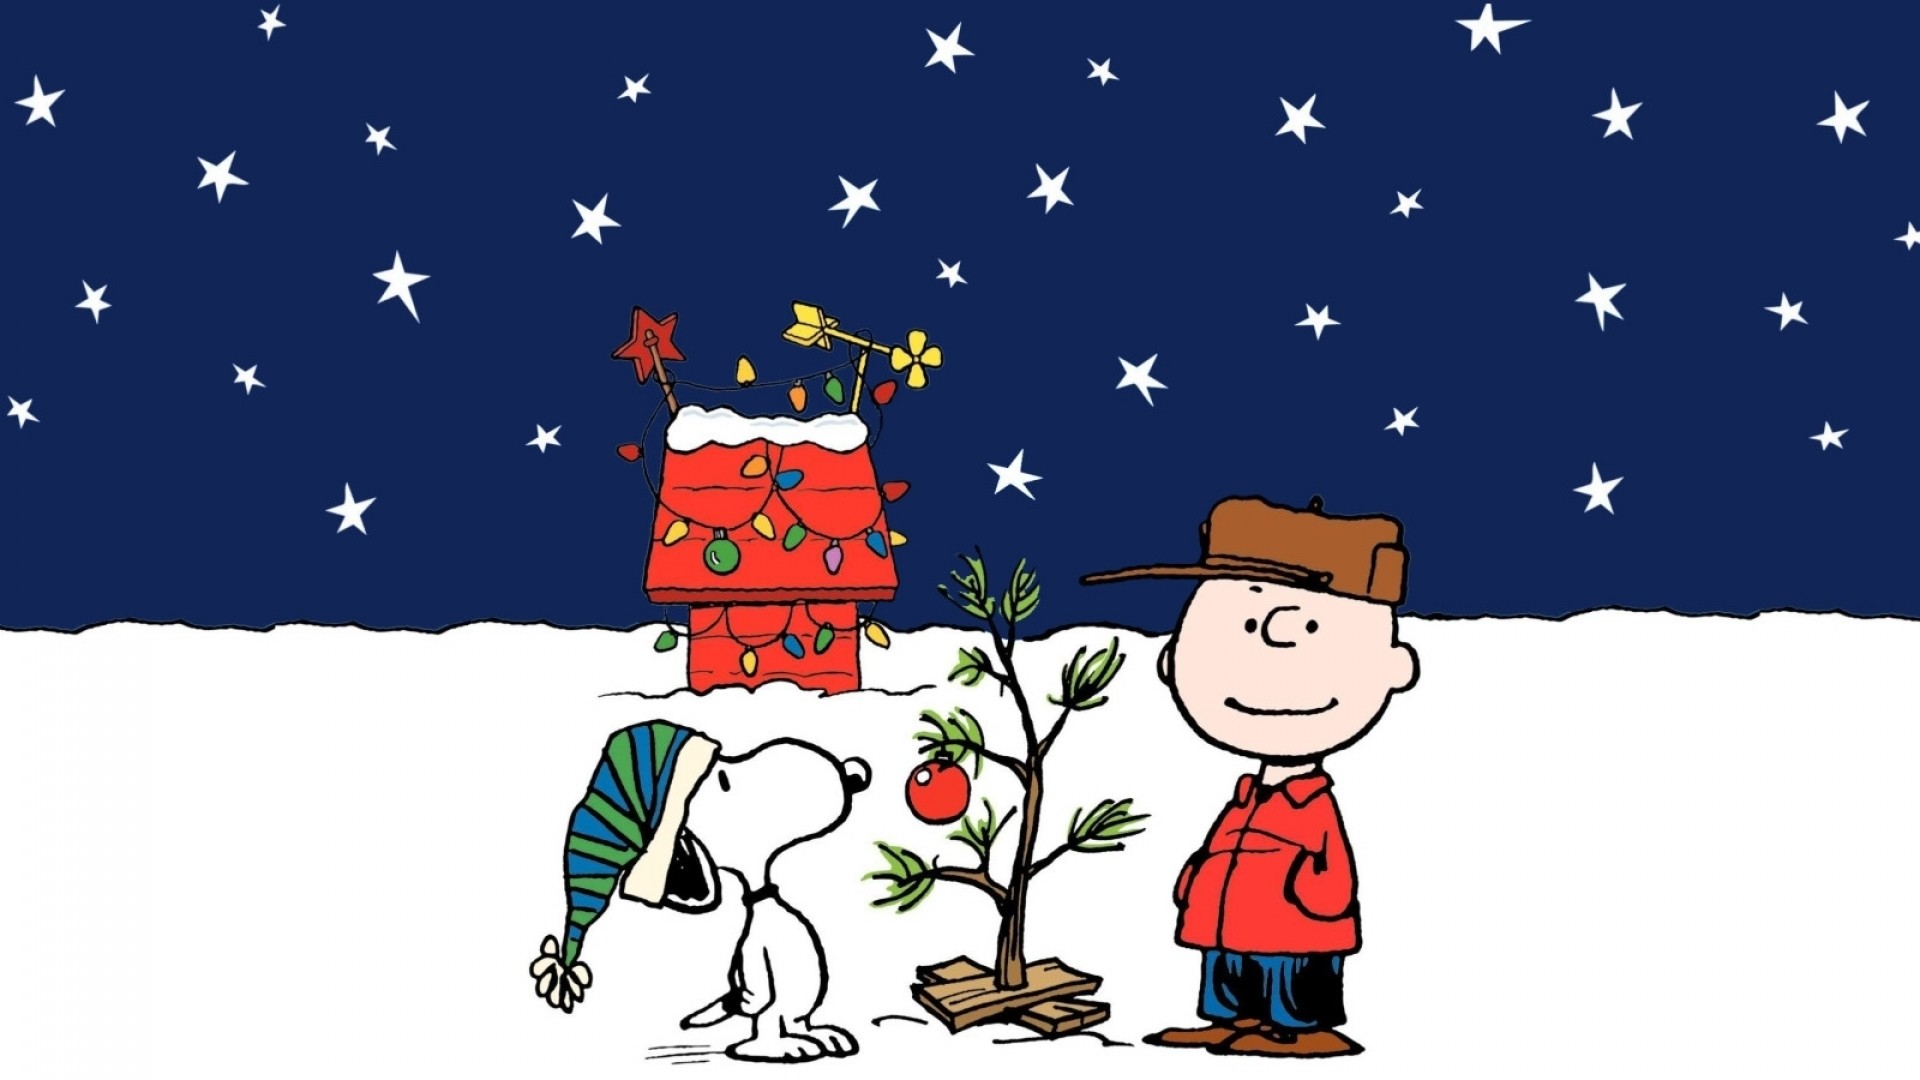 Snoopy Christmas Wallpaper for Computer